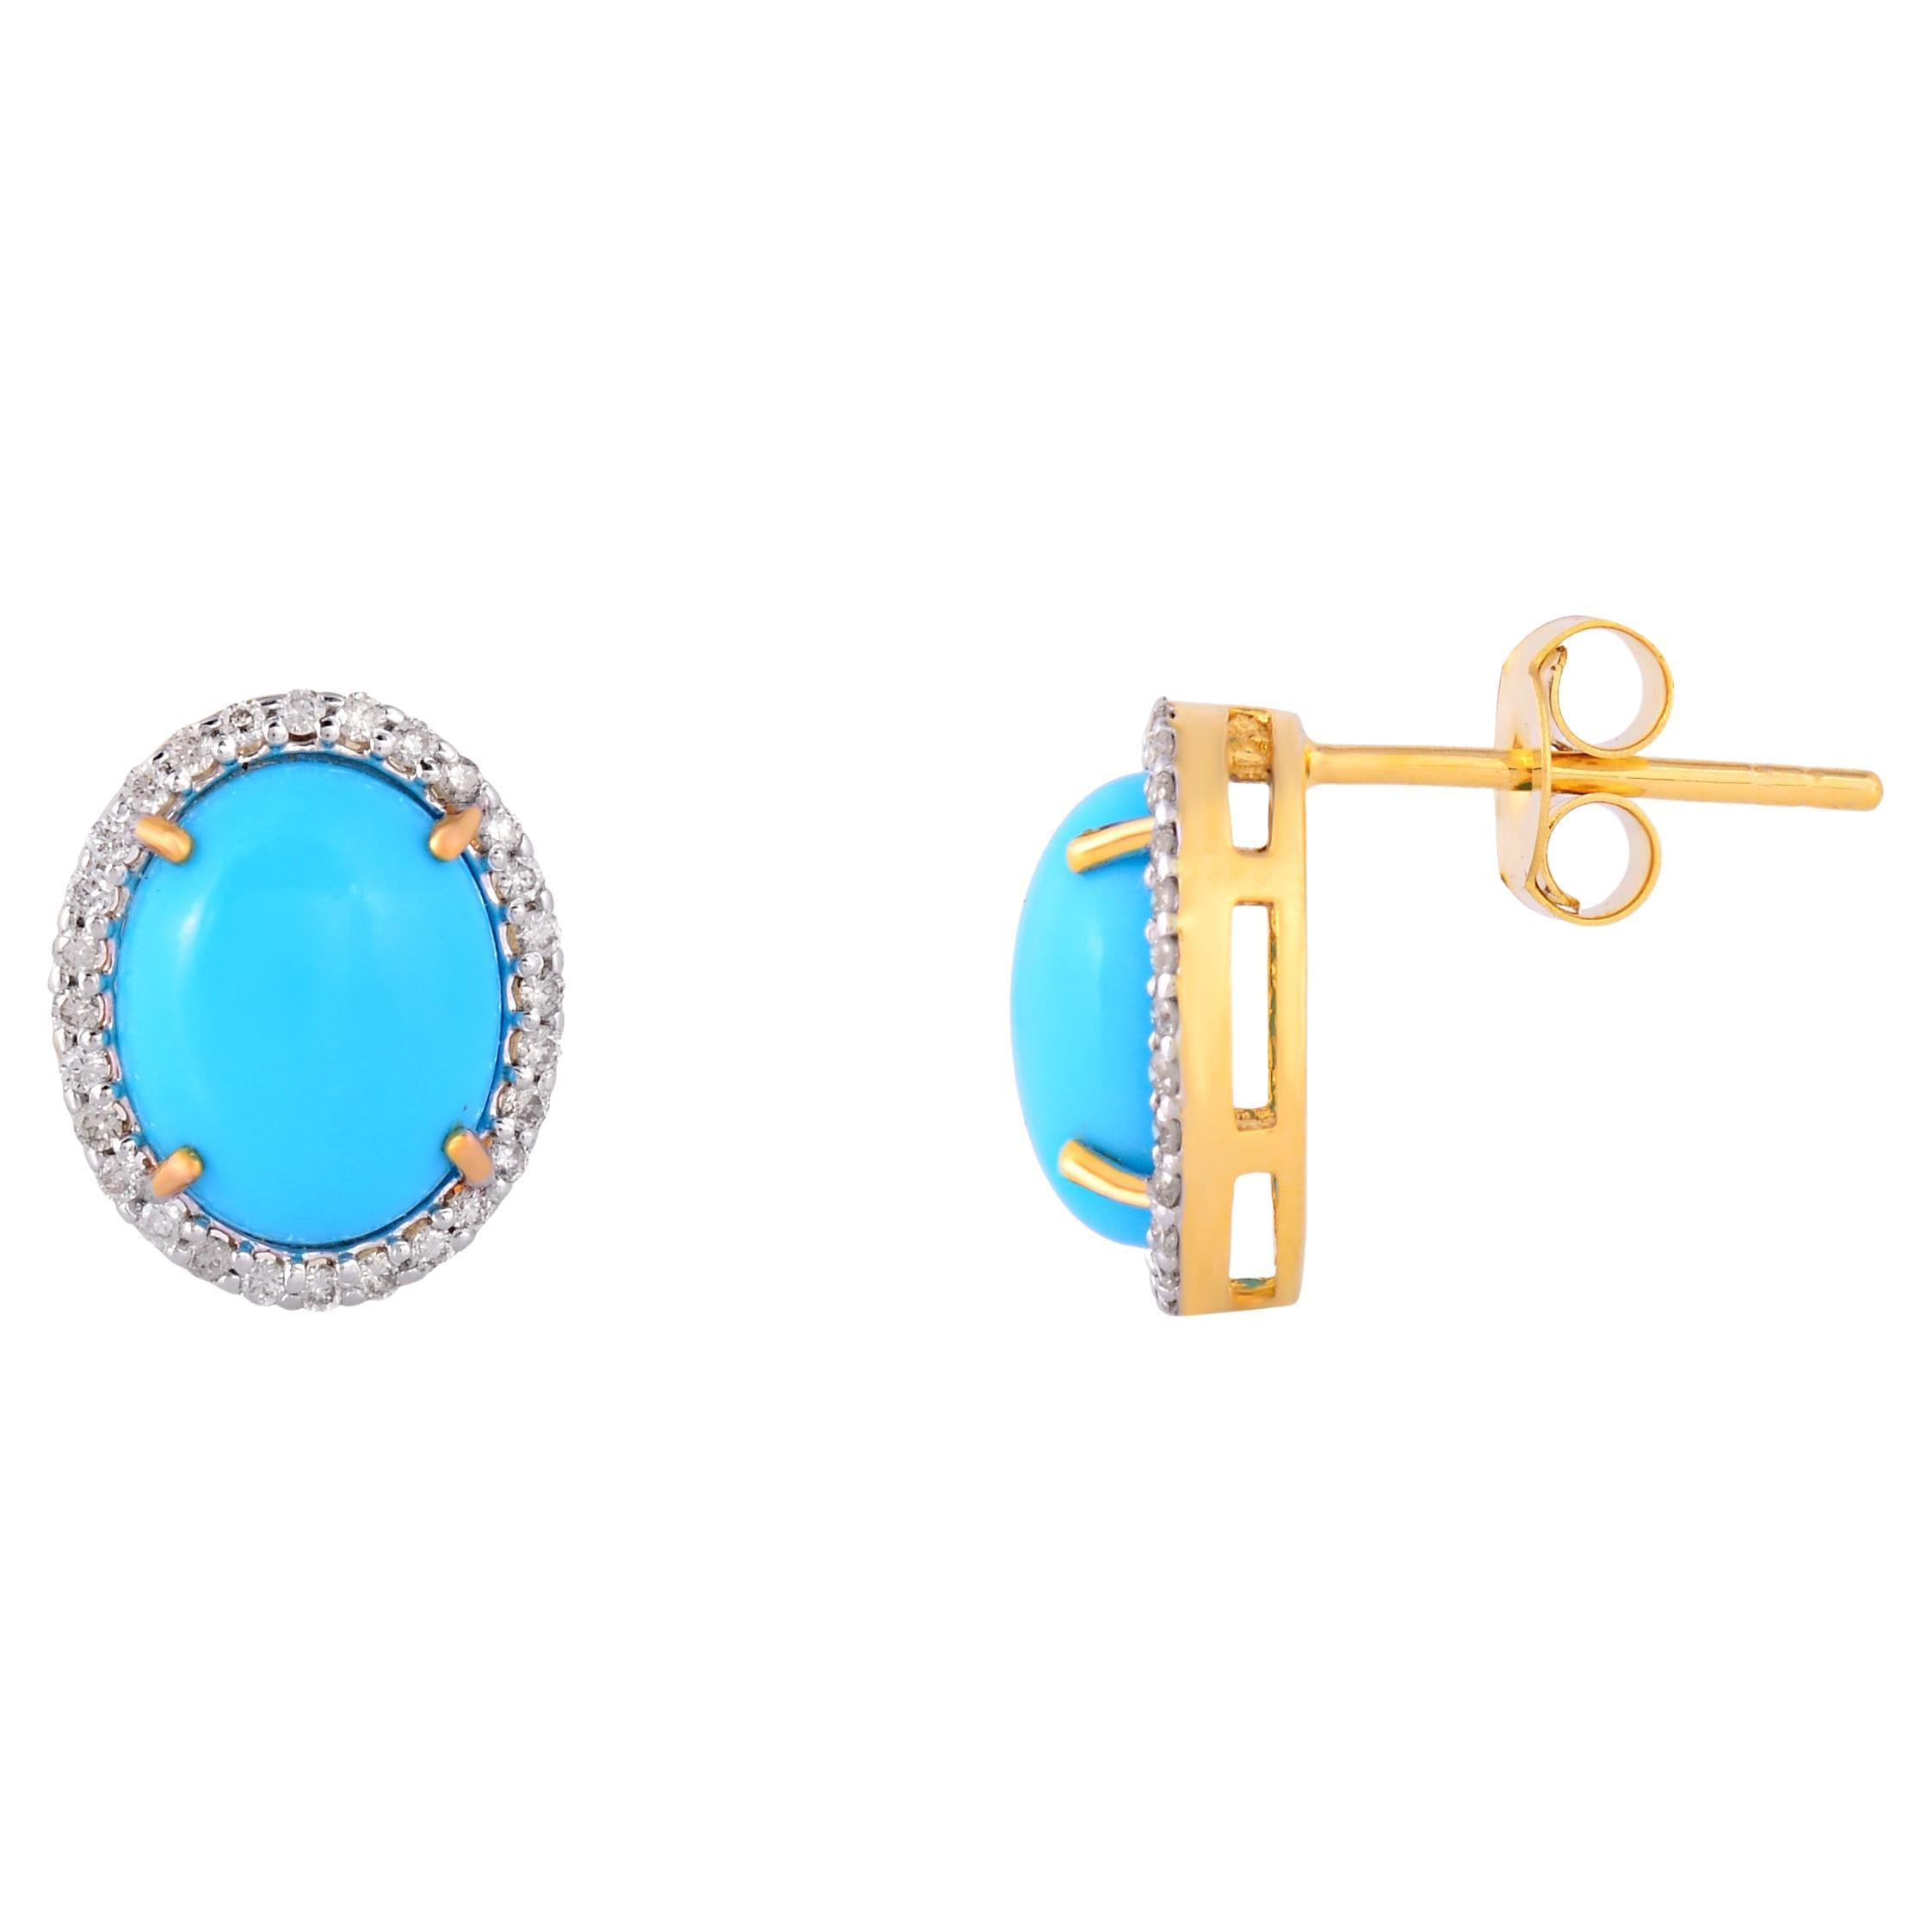 Aggregate more than 211 14k gold turquoise stud earrings super hot